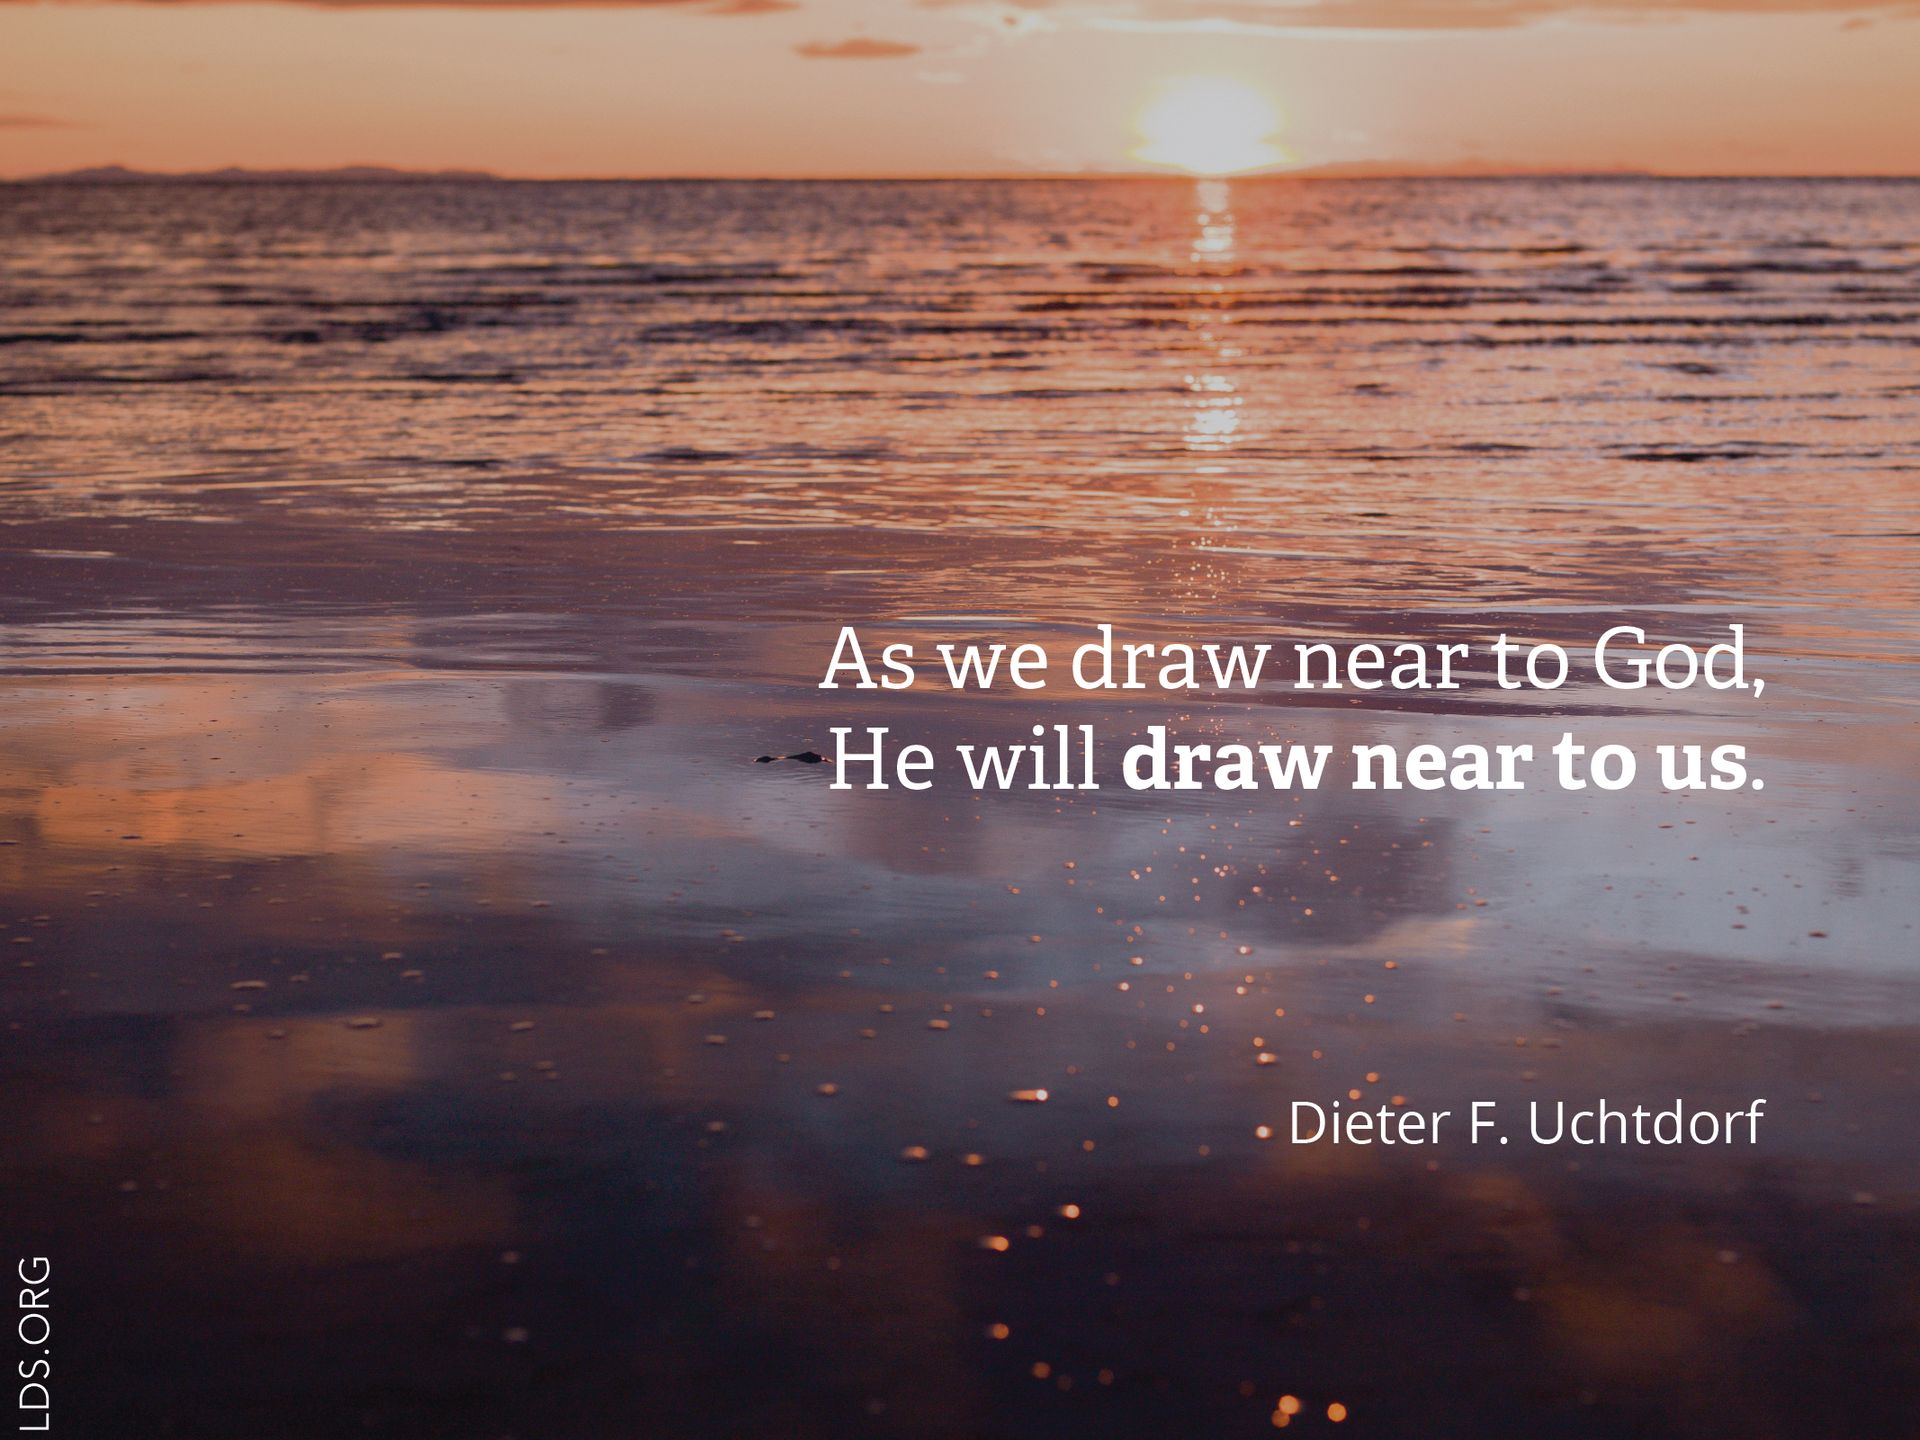 “As we draw near to God, He will draw near to us.” —President Dieter F. Uchtdorf, “The Hope of God’s Light”